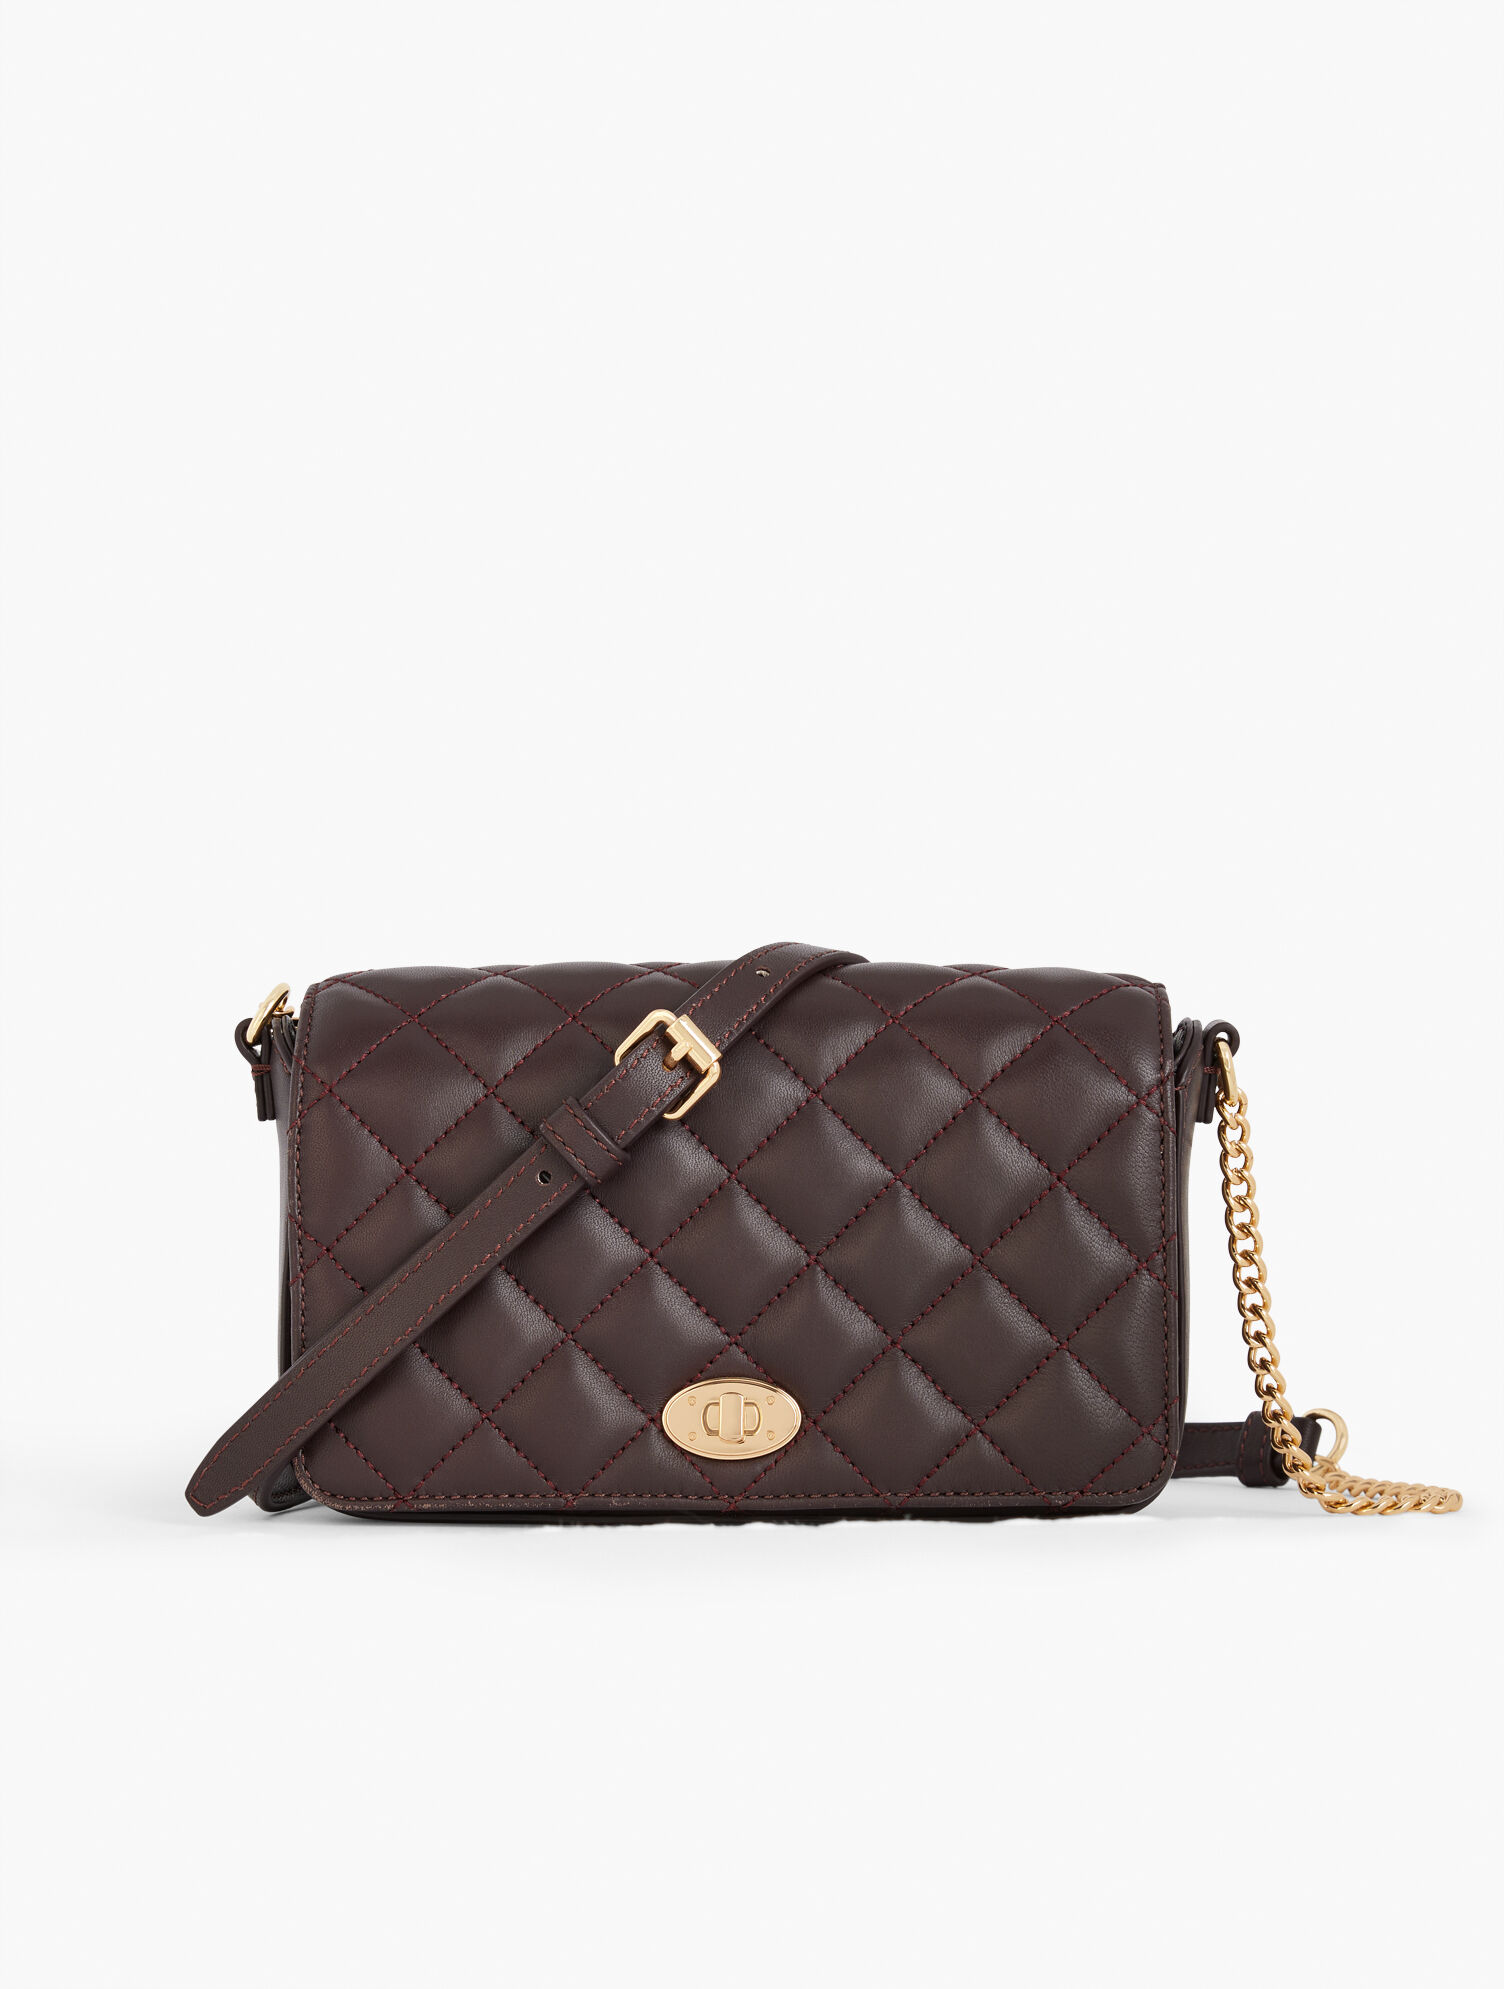 Chain Strap Crossbody Bag - Quilted Leather - Dark Brown - 001 Talbots